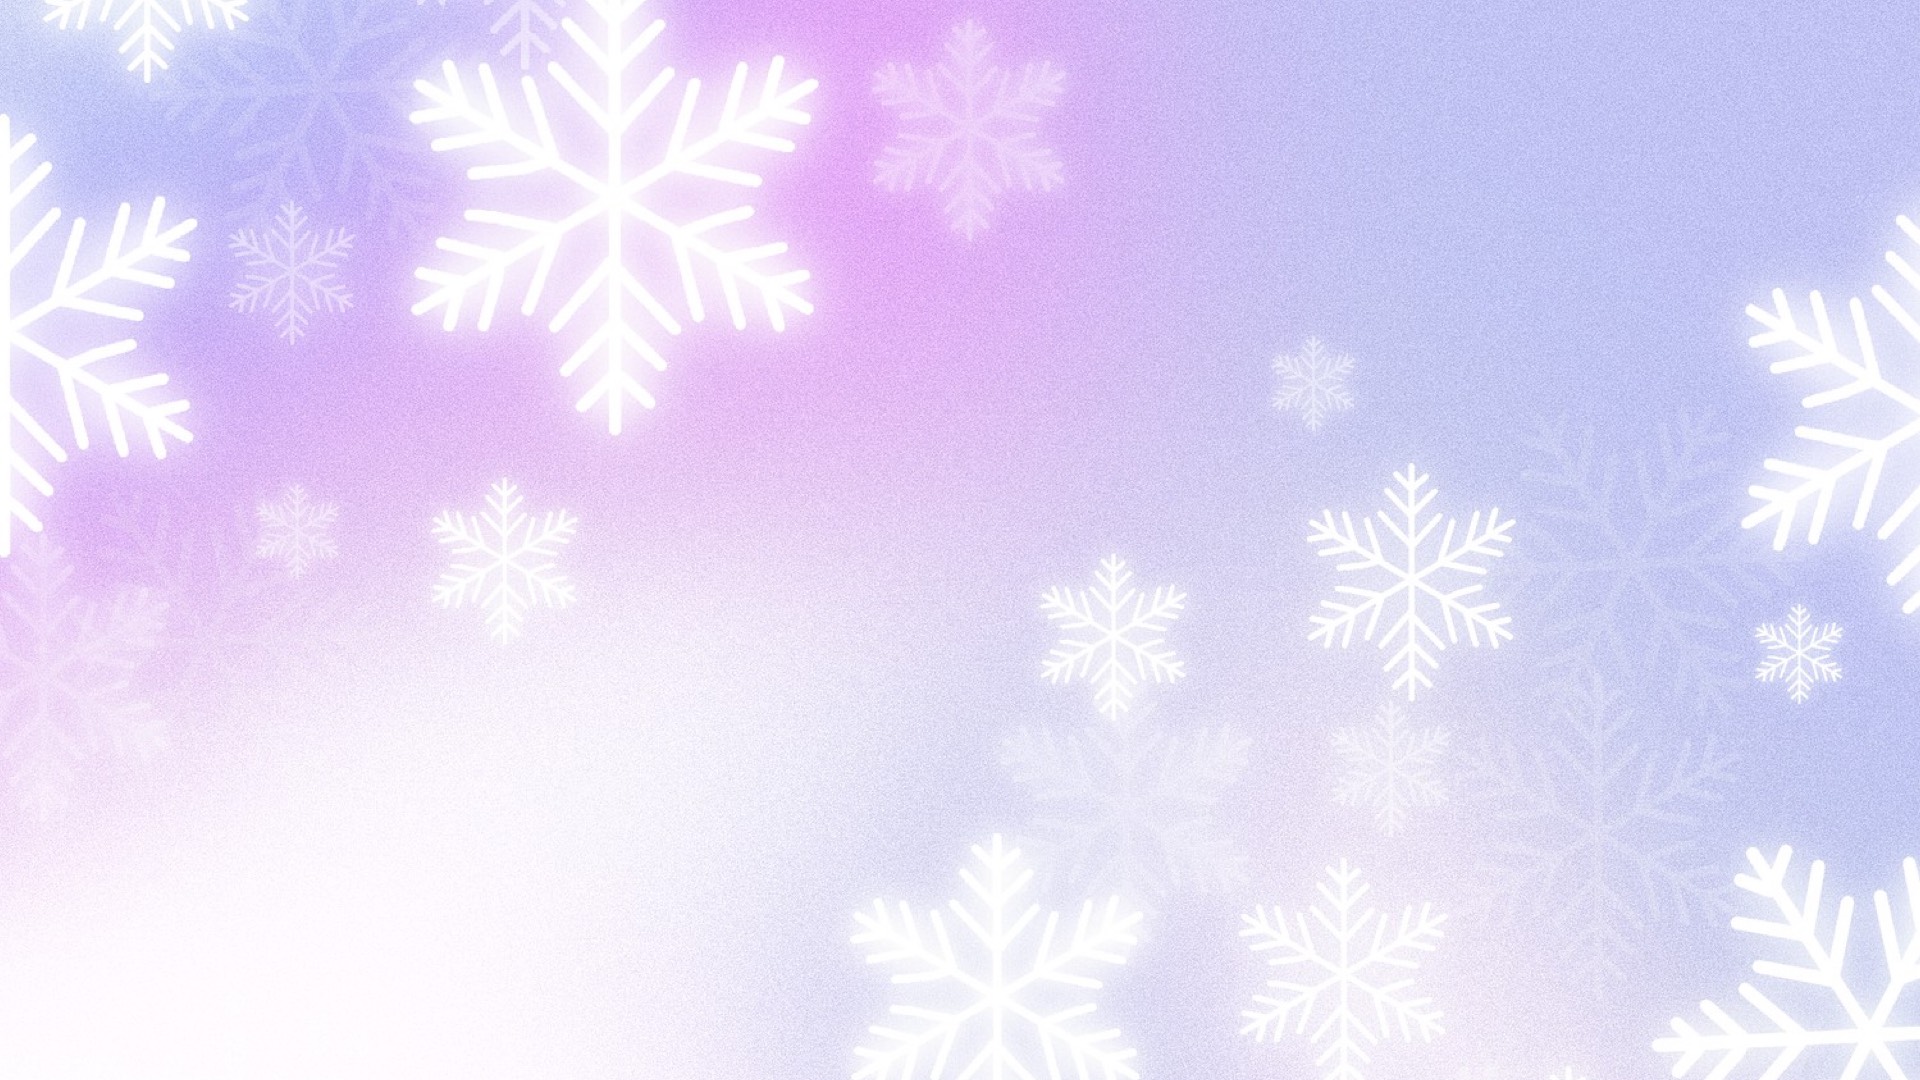 A Blurry Photo Of Snow Flakes On A Blue And Pink Background Zoom Backgrounds Template